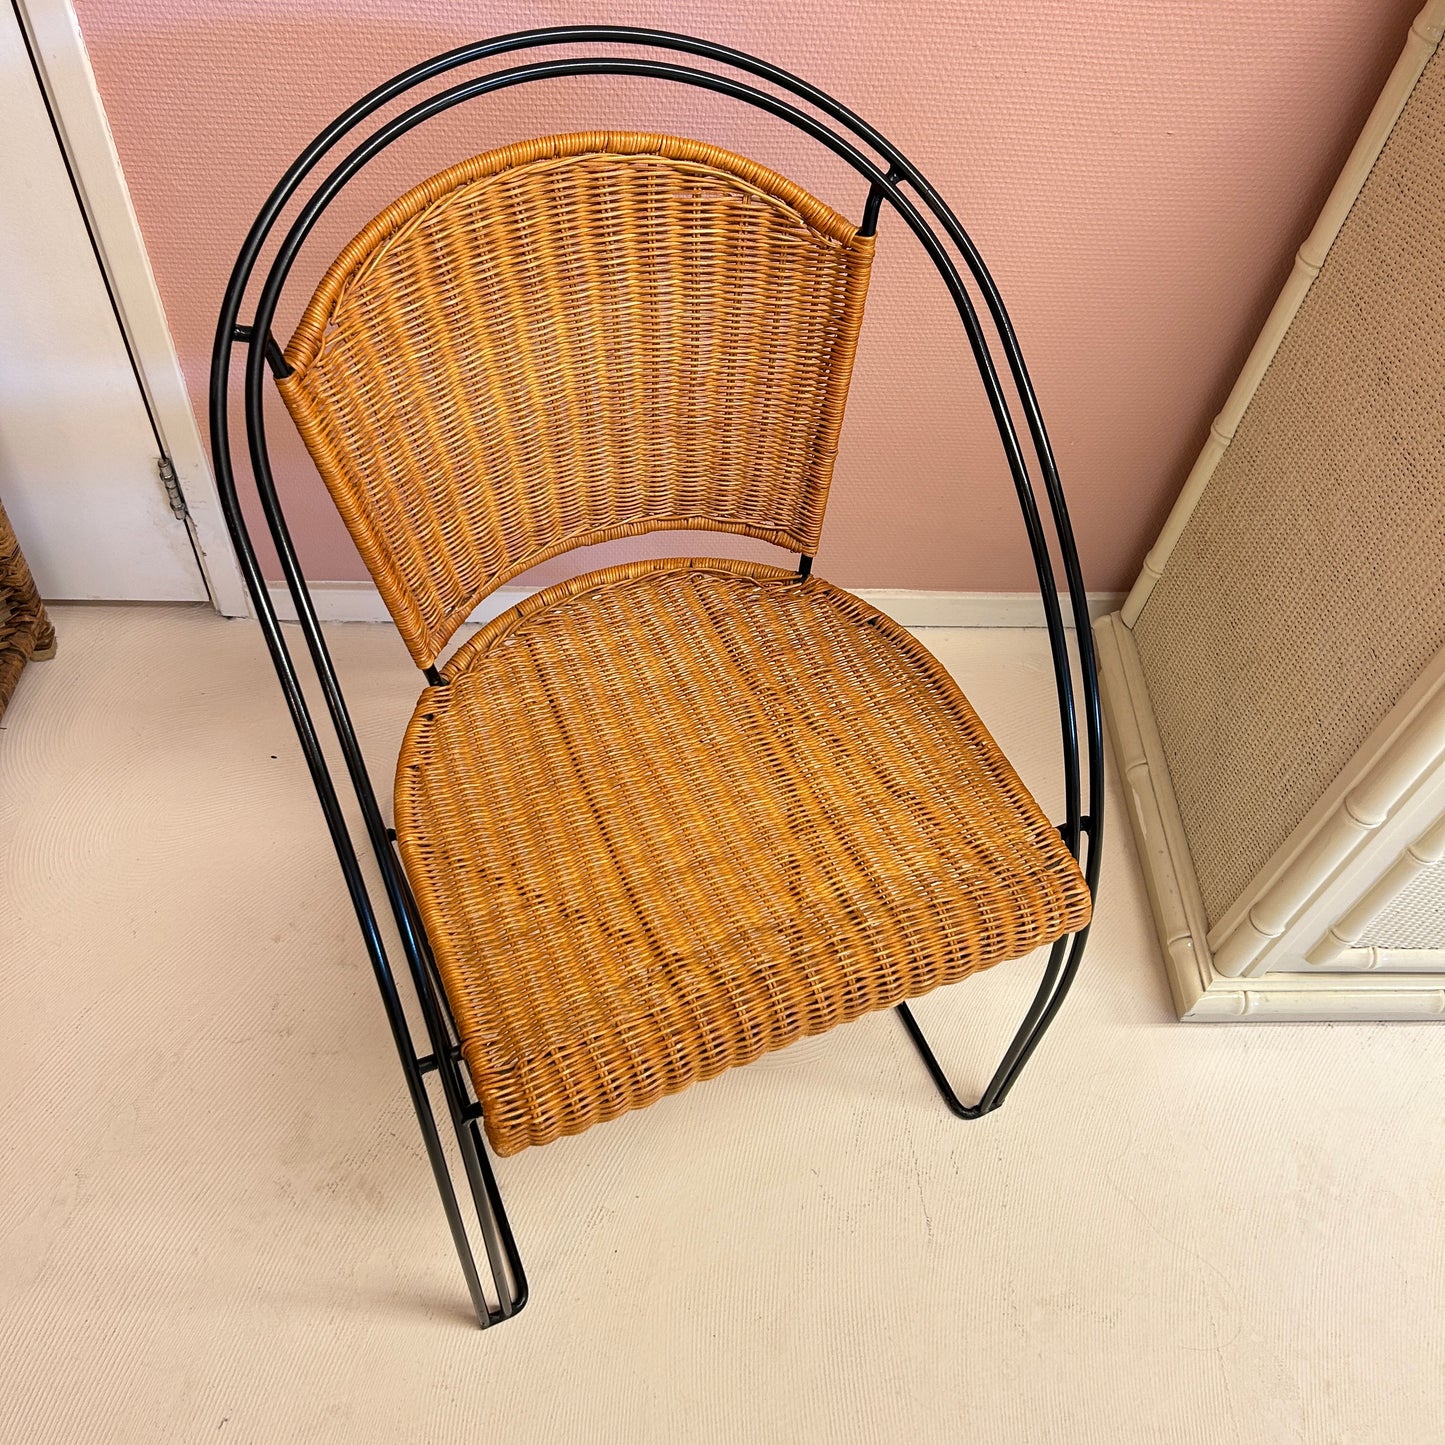 Bended iron wicker chairs